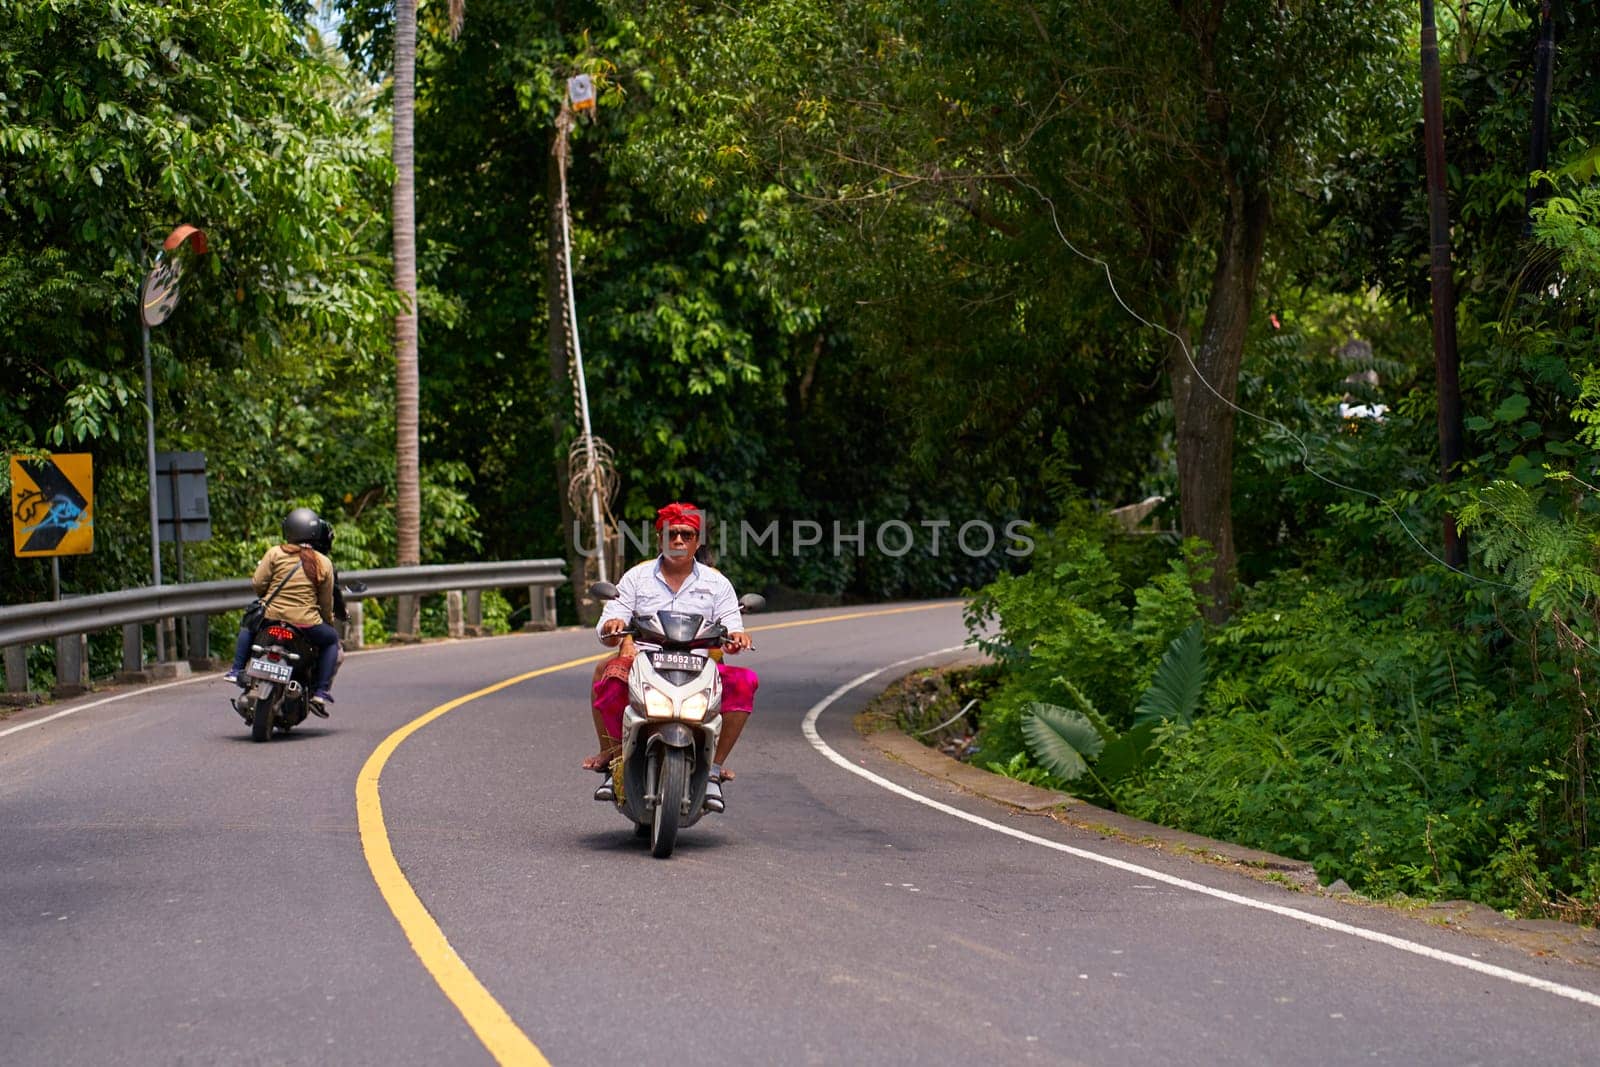 A person on a motorcycle rides a scenic asphalt road in Asia. by Try_my_best